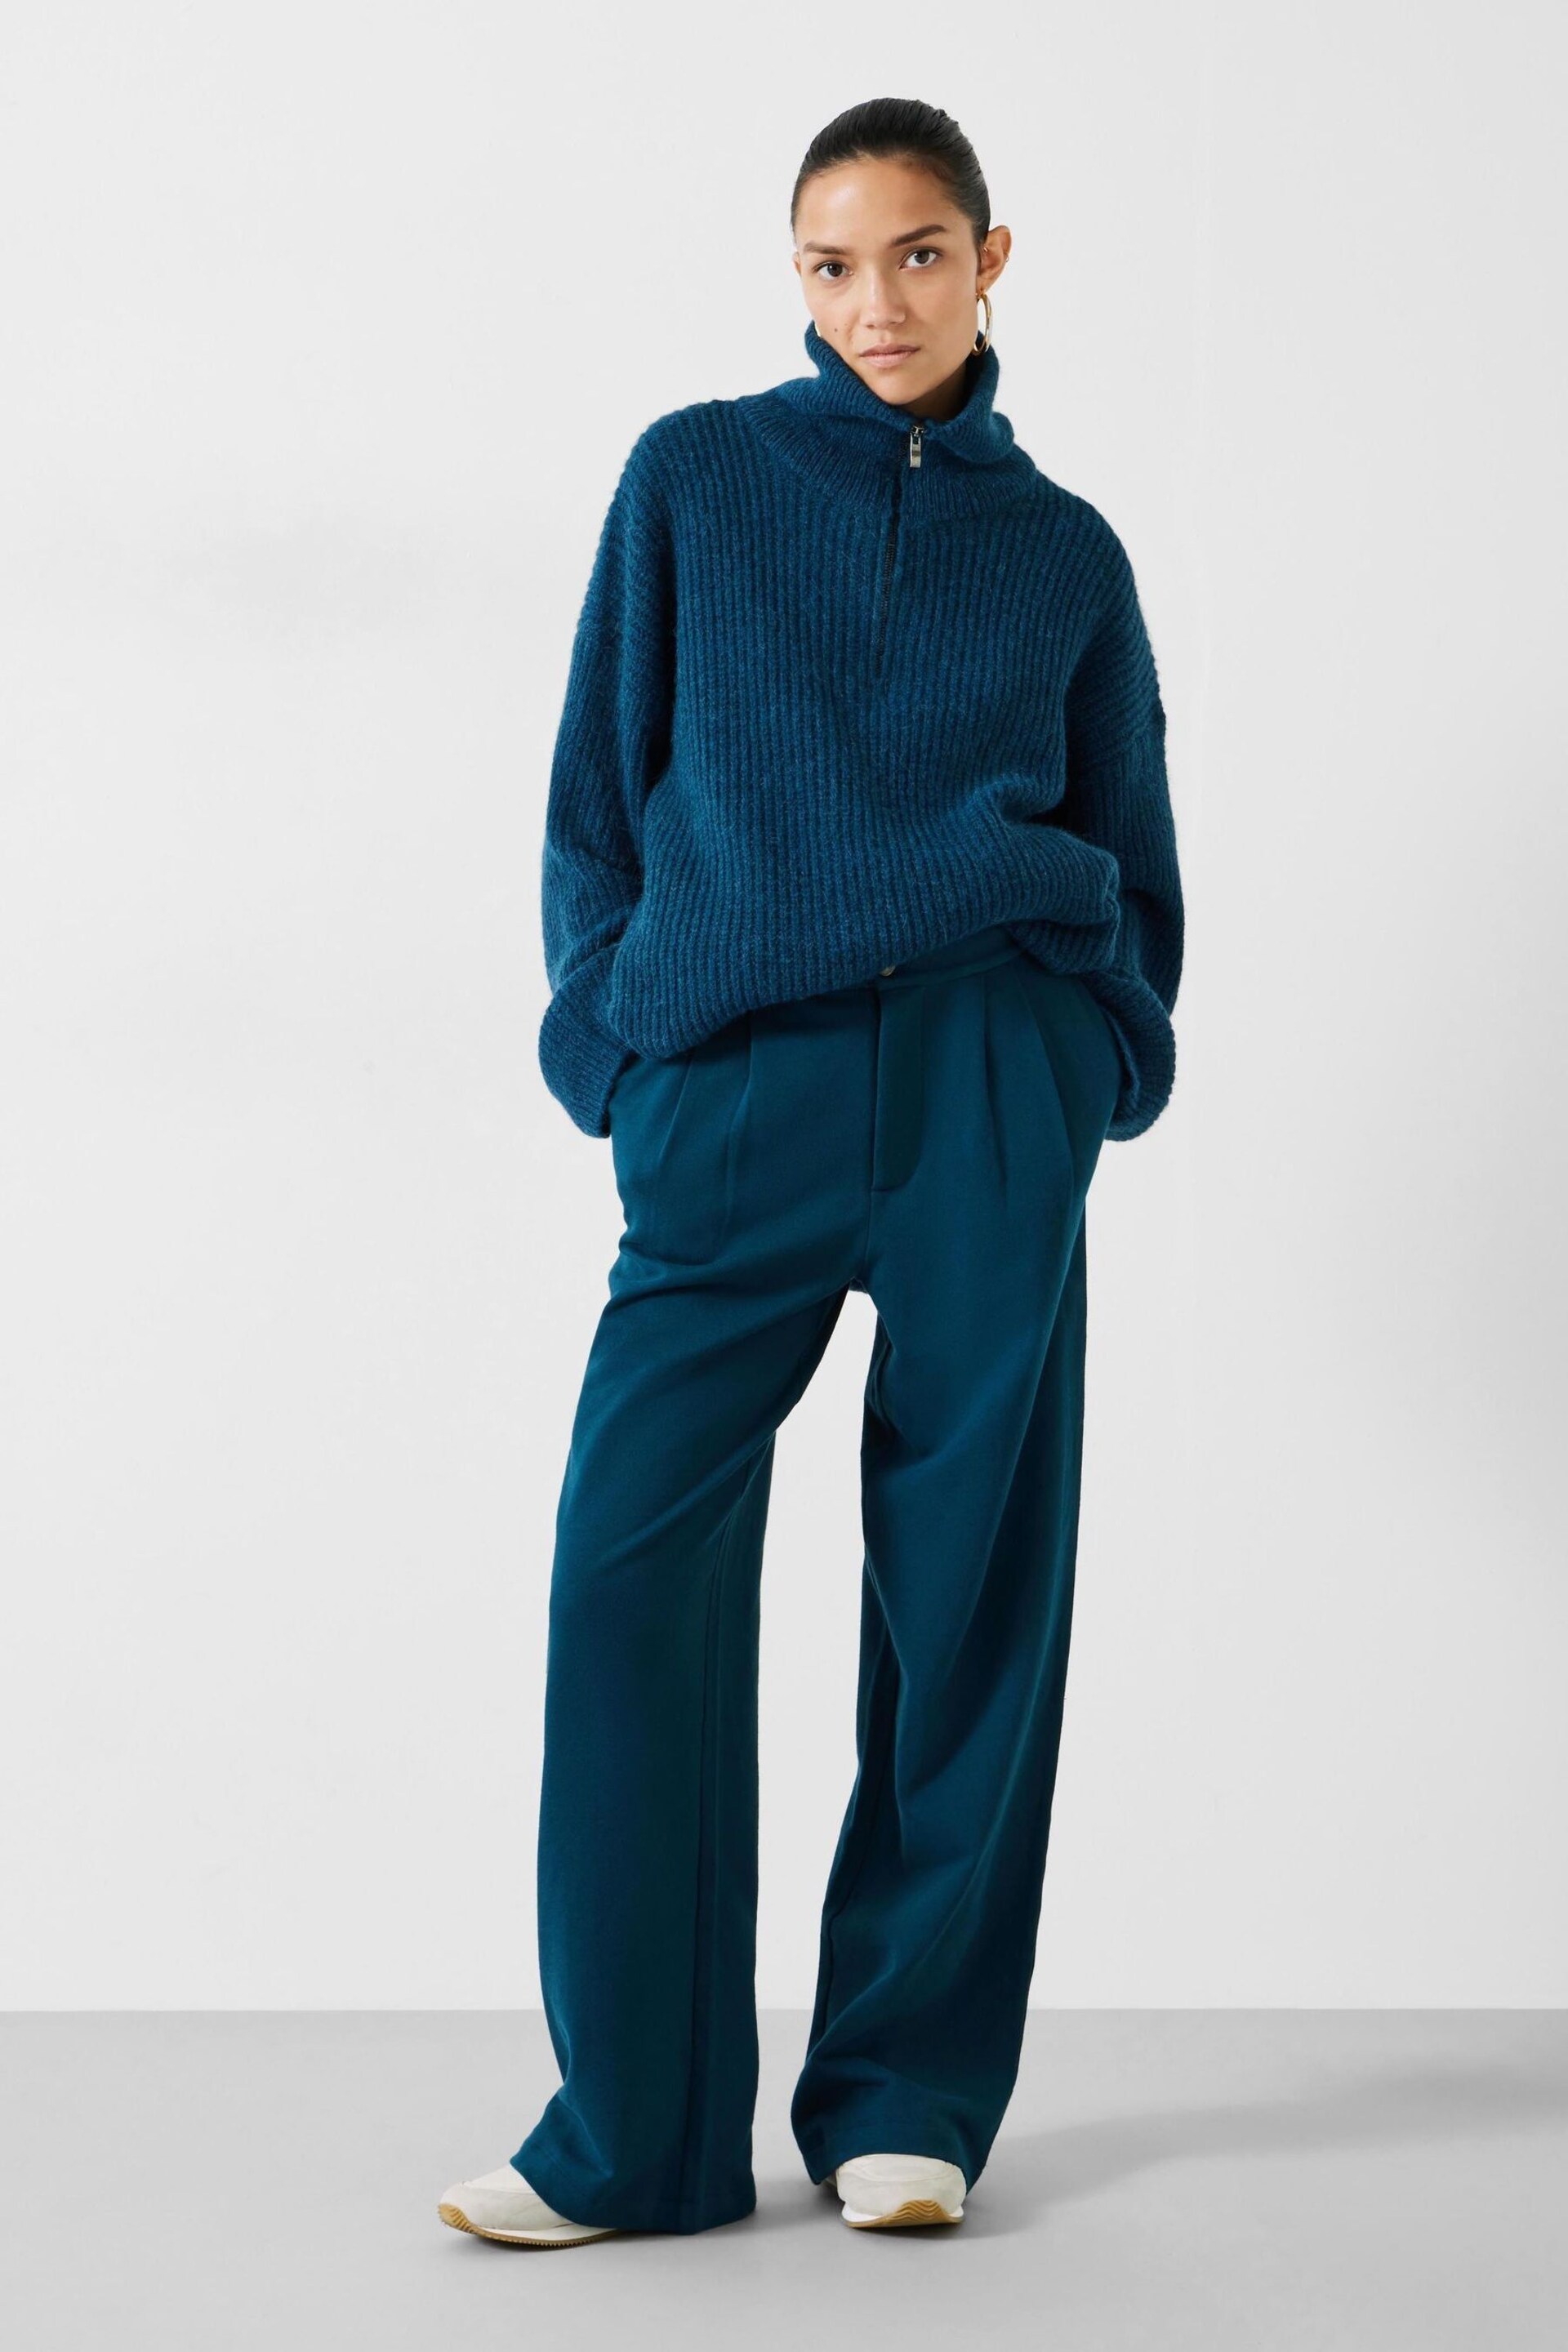 Hush Green Theo Tailored Jersey Trousers - Image 1 of 5